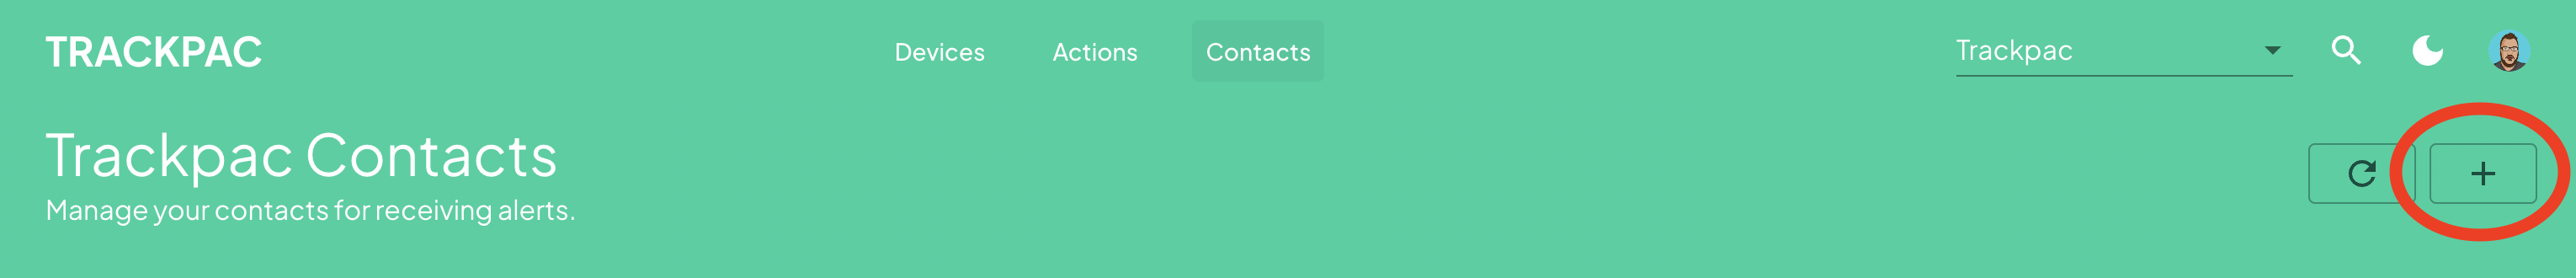 Add a contact button